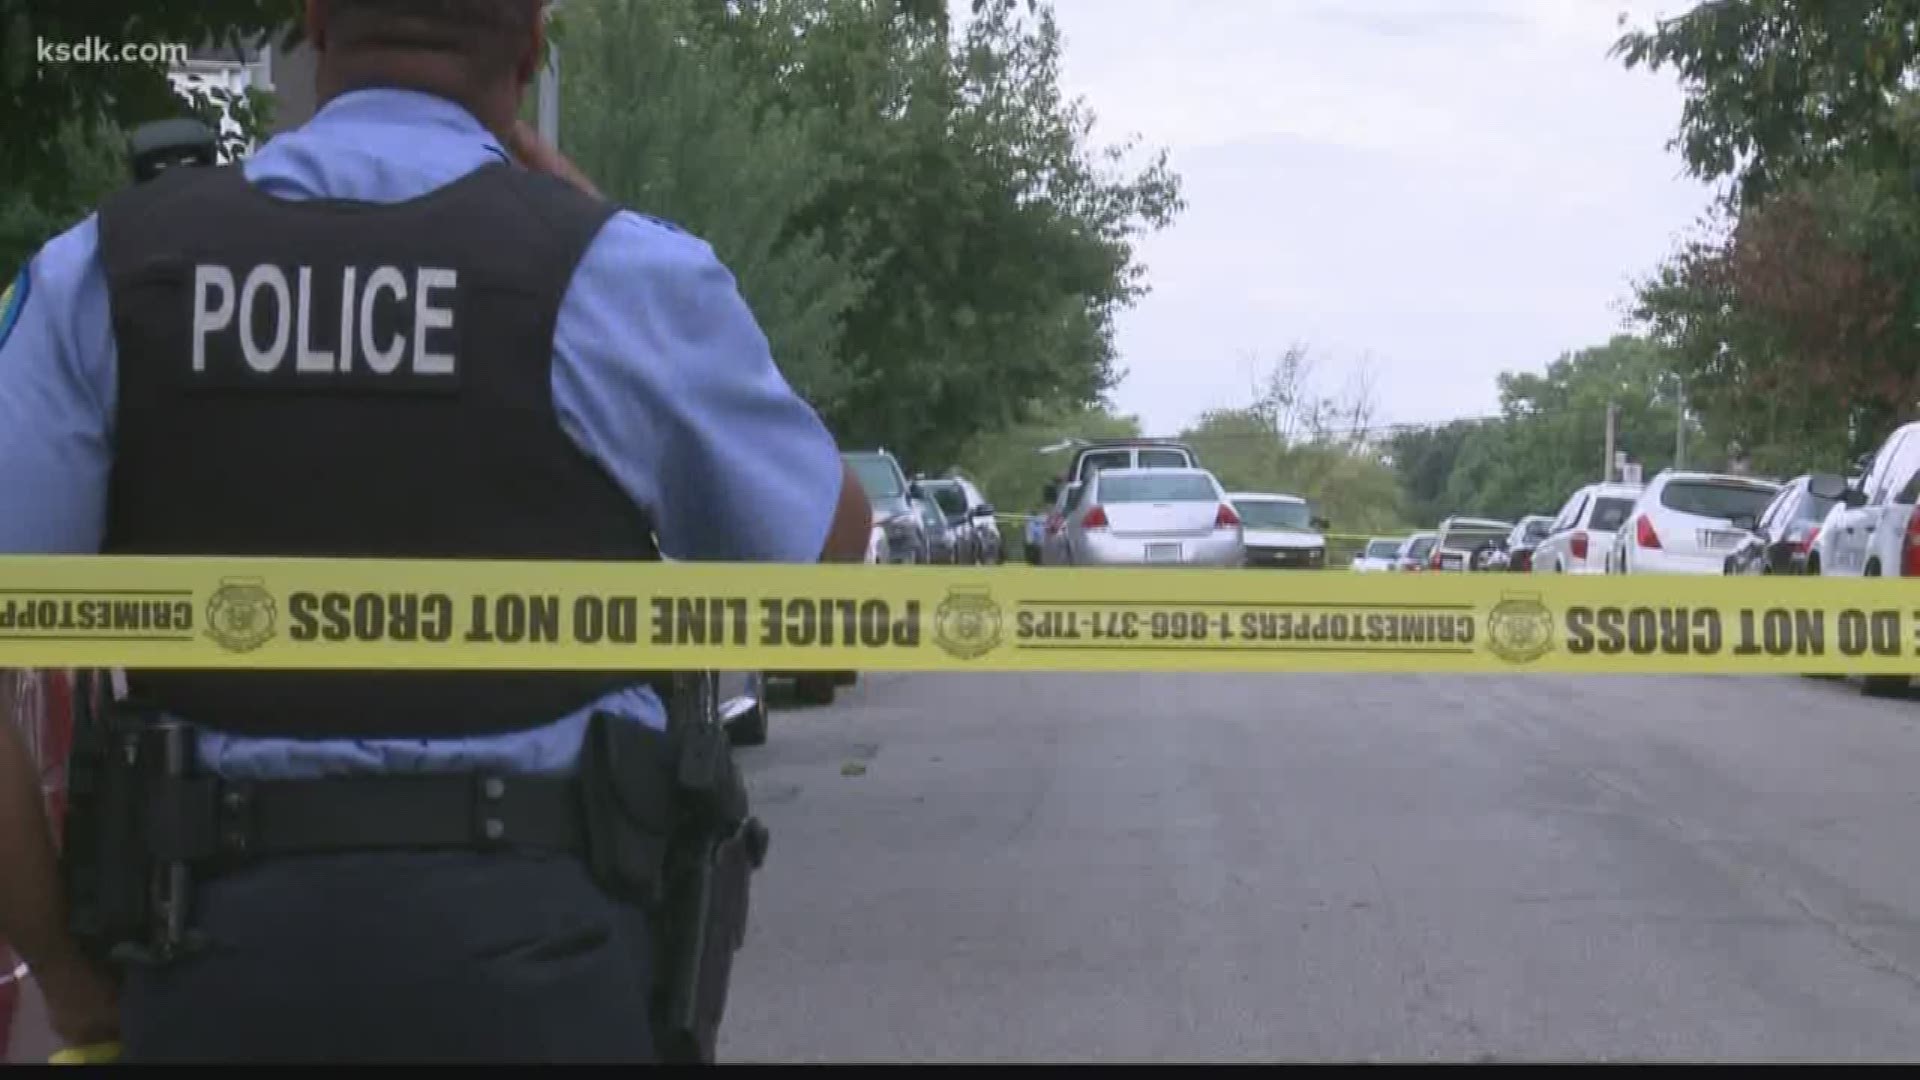 Another child has become the victim of gun violence in St. Louis. Early Sunday morning a 15-year-old boy was shot in the head. Police are investigating the shooting as a homicide.